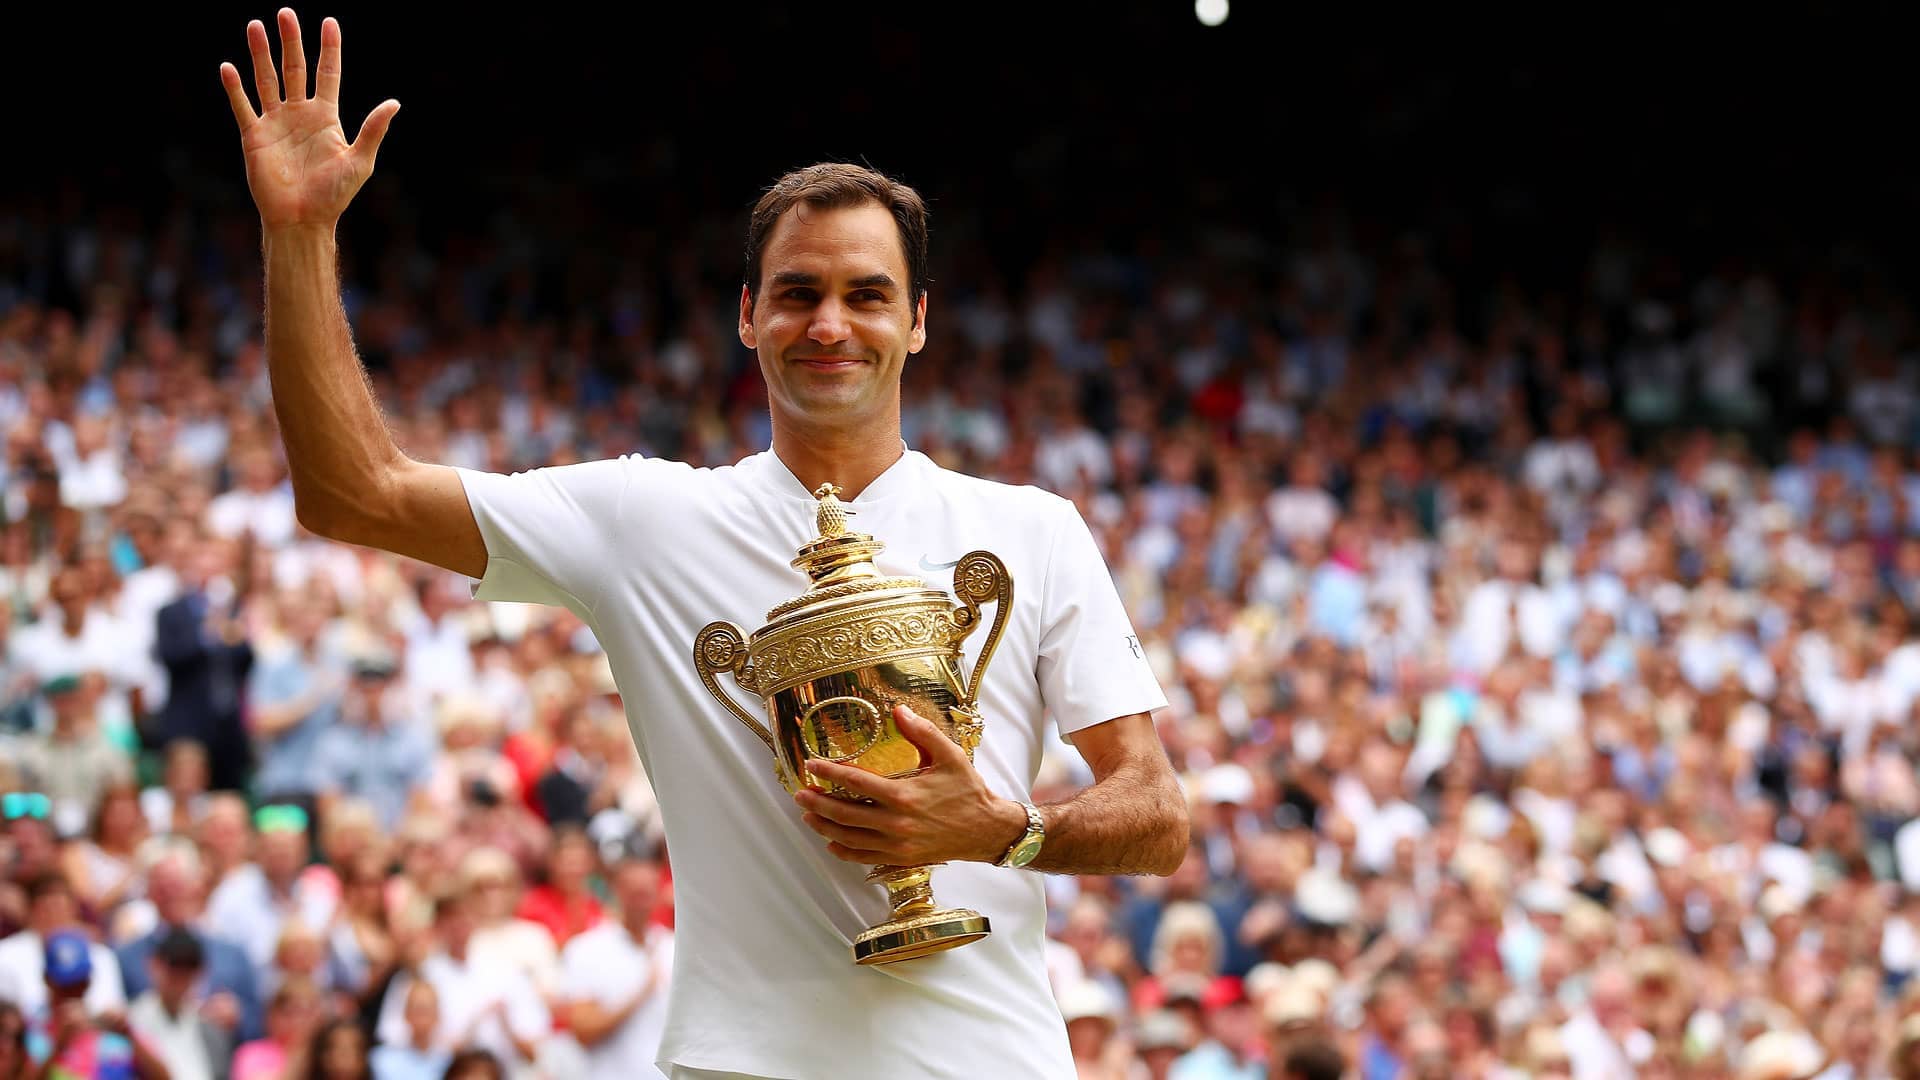 Roger Federer beat Marin Cilic in last year's Wimbledon final. Will the Swiss capture his ninth crown at The Championships in 2018?